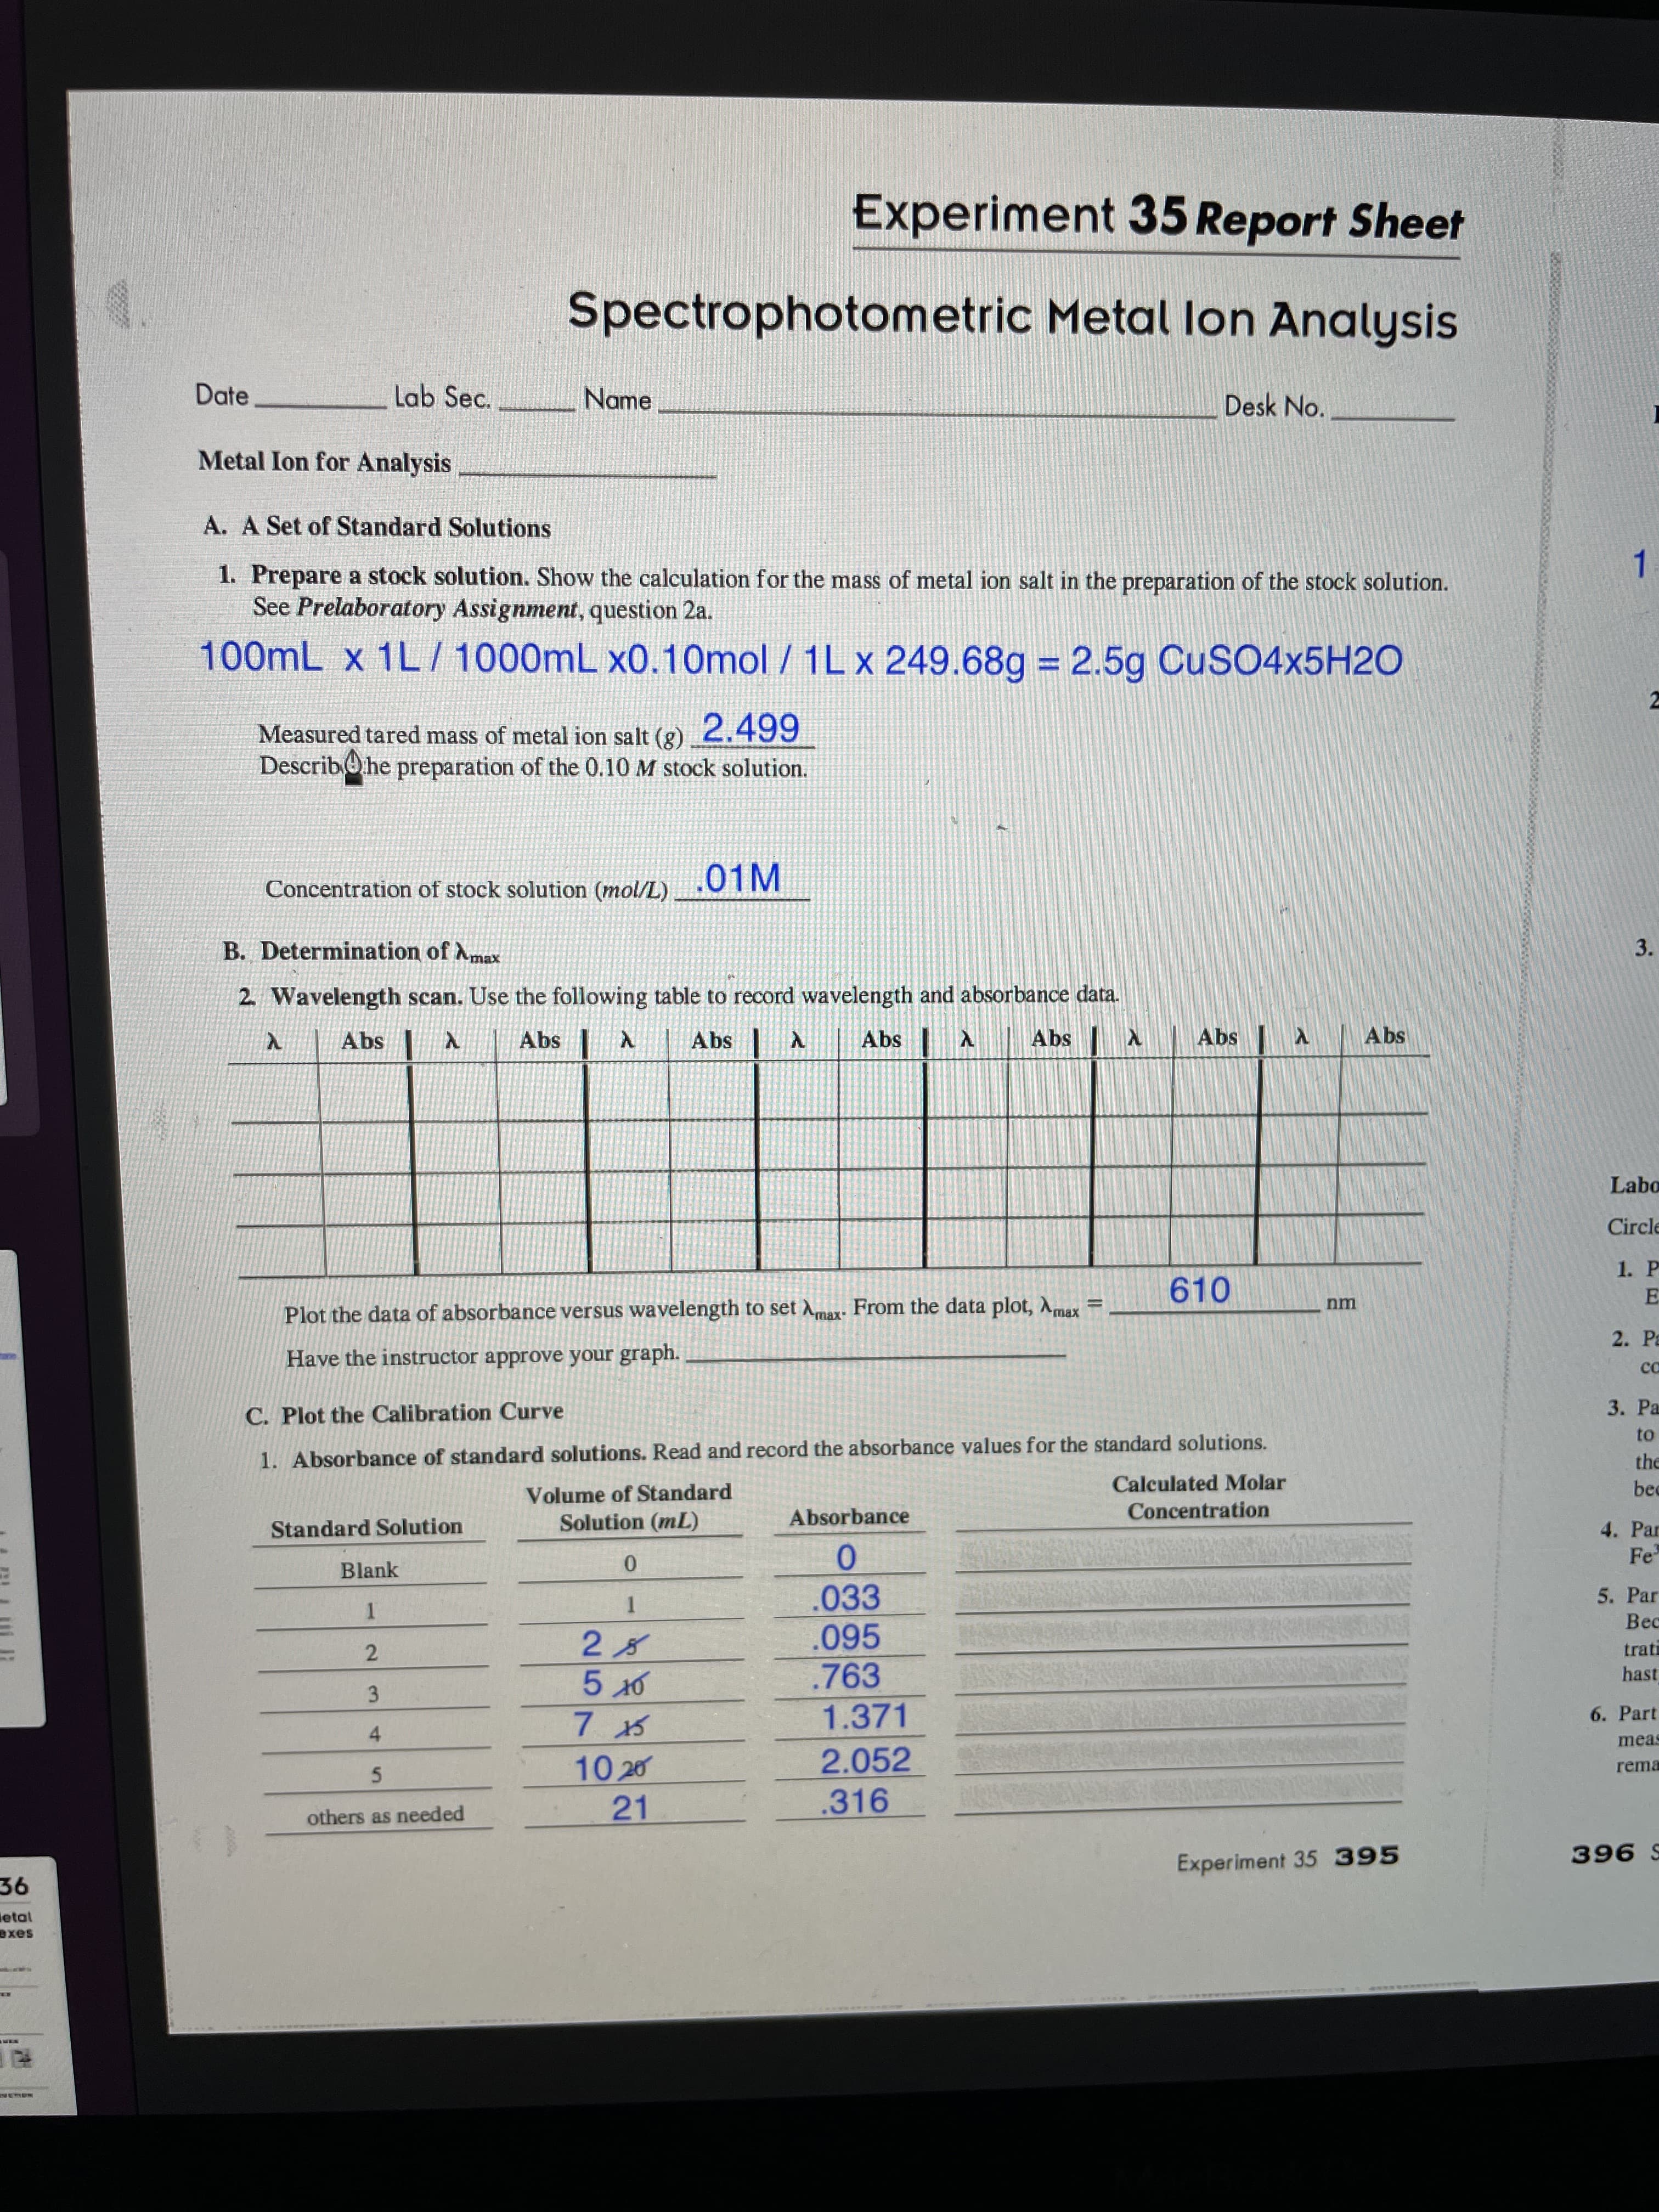 3.
www.w
3.
Experiment 35 Report Sheet
Spectrophotometric Metal lon Analysis
Date
Lab Sec.
Name
Desk No.
Metal Ion for Analysis
A. A Set of Standard Solutions
1. Prepare a stock solution. Show the calculation for the mass of metal ion salt in the preparation of the stock solution.
See Prelaboratory Assignment, question 2a.
1.
100mL x 1L/ 1000mL x0.10mol / 1L x 249.68g = 2.5g CUSO4×5H2O
%3D
Measured tared mass of metal ion salt (g) 2.499
DescribO he preparation of the 0.10 M stock solution.
.01M
Concentration of stock solution (mol/L)
B. Determination of Amax
2. Wavelength scan. Use the following table to record wavelength and absorbance data.
Abs
Abs
Abs
Y sqv
Abs
X| sq
Labo
Circle
1. P
610
E
nm
Plot the data of absorbance versus wavelength to set Amax. From the data plot, Amax
2. Pa
Have the instructor approve your graph.
ca
C. Plot the Calibration Curve
3. Pa
1. Absorbance of standard solutions. Read and record the absorbance values for the standard solutions.
Calculated Molar
the
Volume of Standard
Solution (mL)
Absorbance
Concentration
Standard Solution
4. Par
Fe
Blank
.033
.095
.763
5. Par
1.
Bec
trati
2.
hast
1.371
6. Part
4
meas
2.052
10 20
21
rema
5.
others as needed
.316
Experiment 35 395
S 966
etal
saxe
